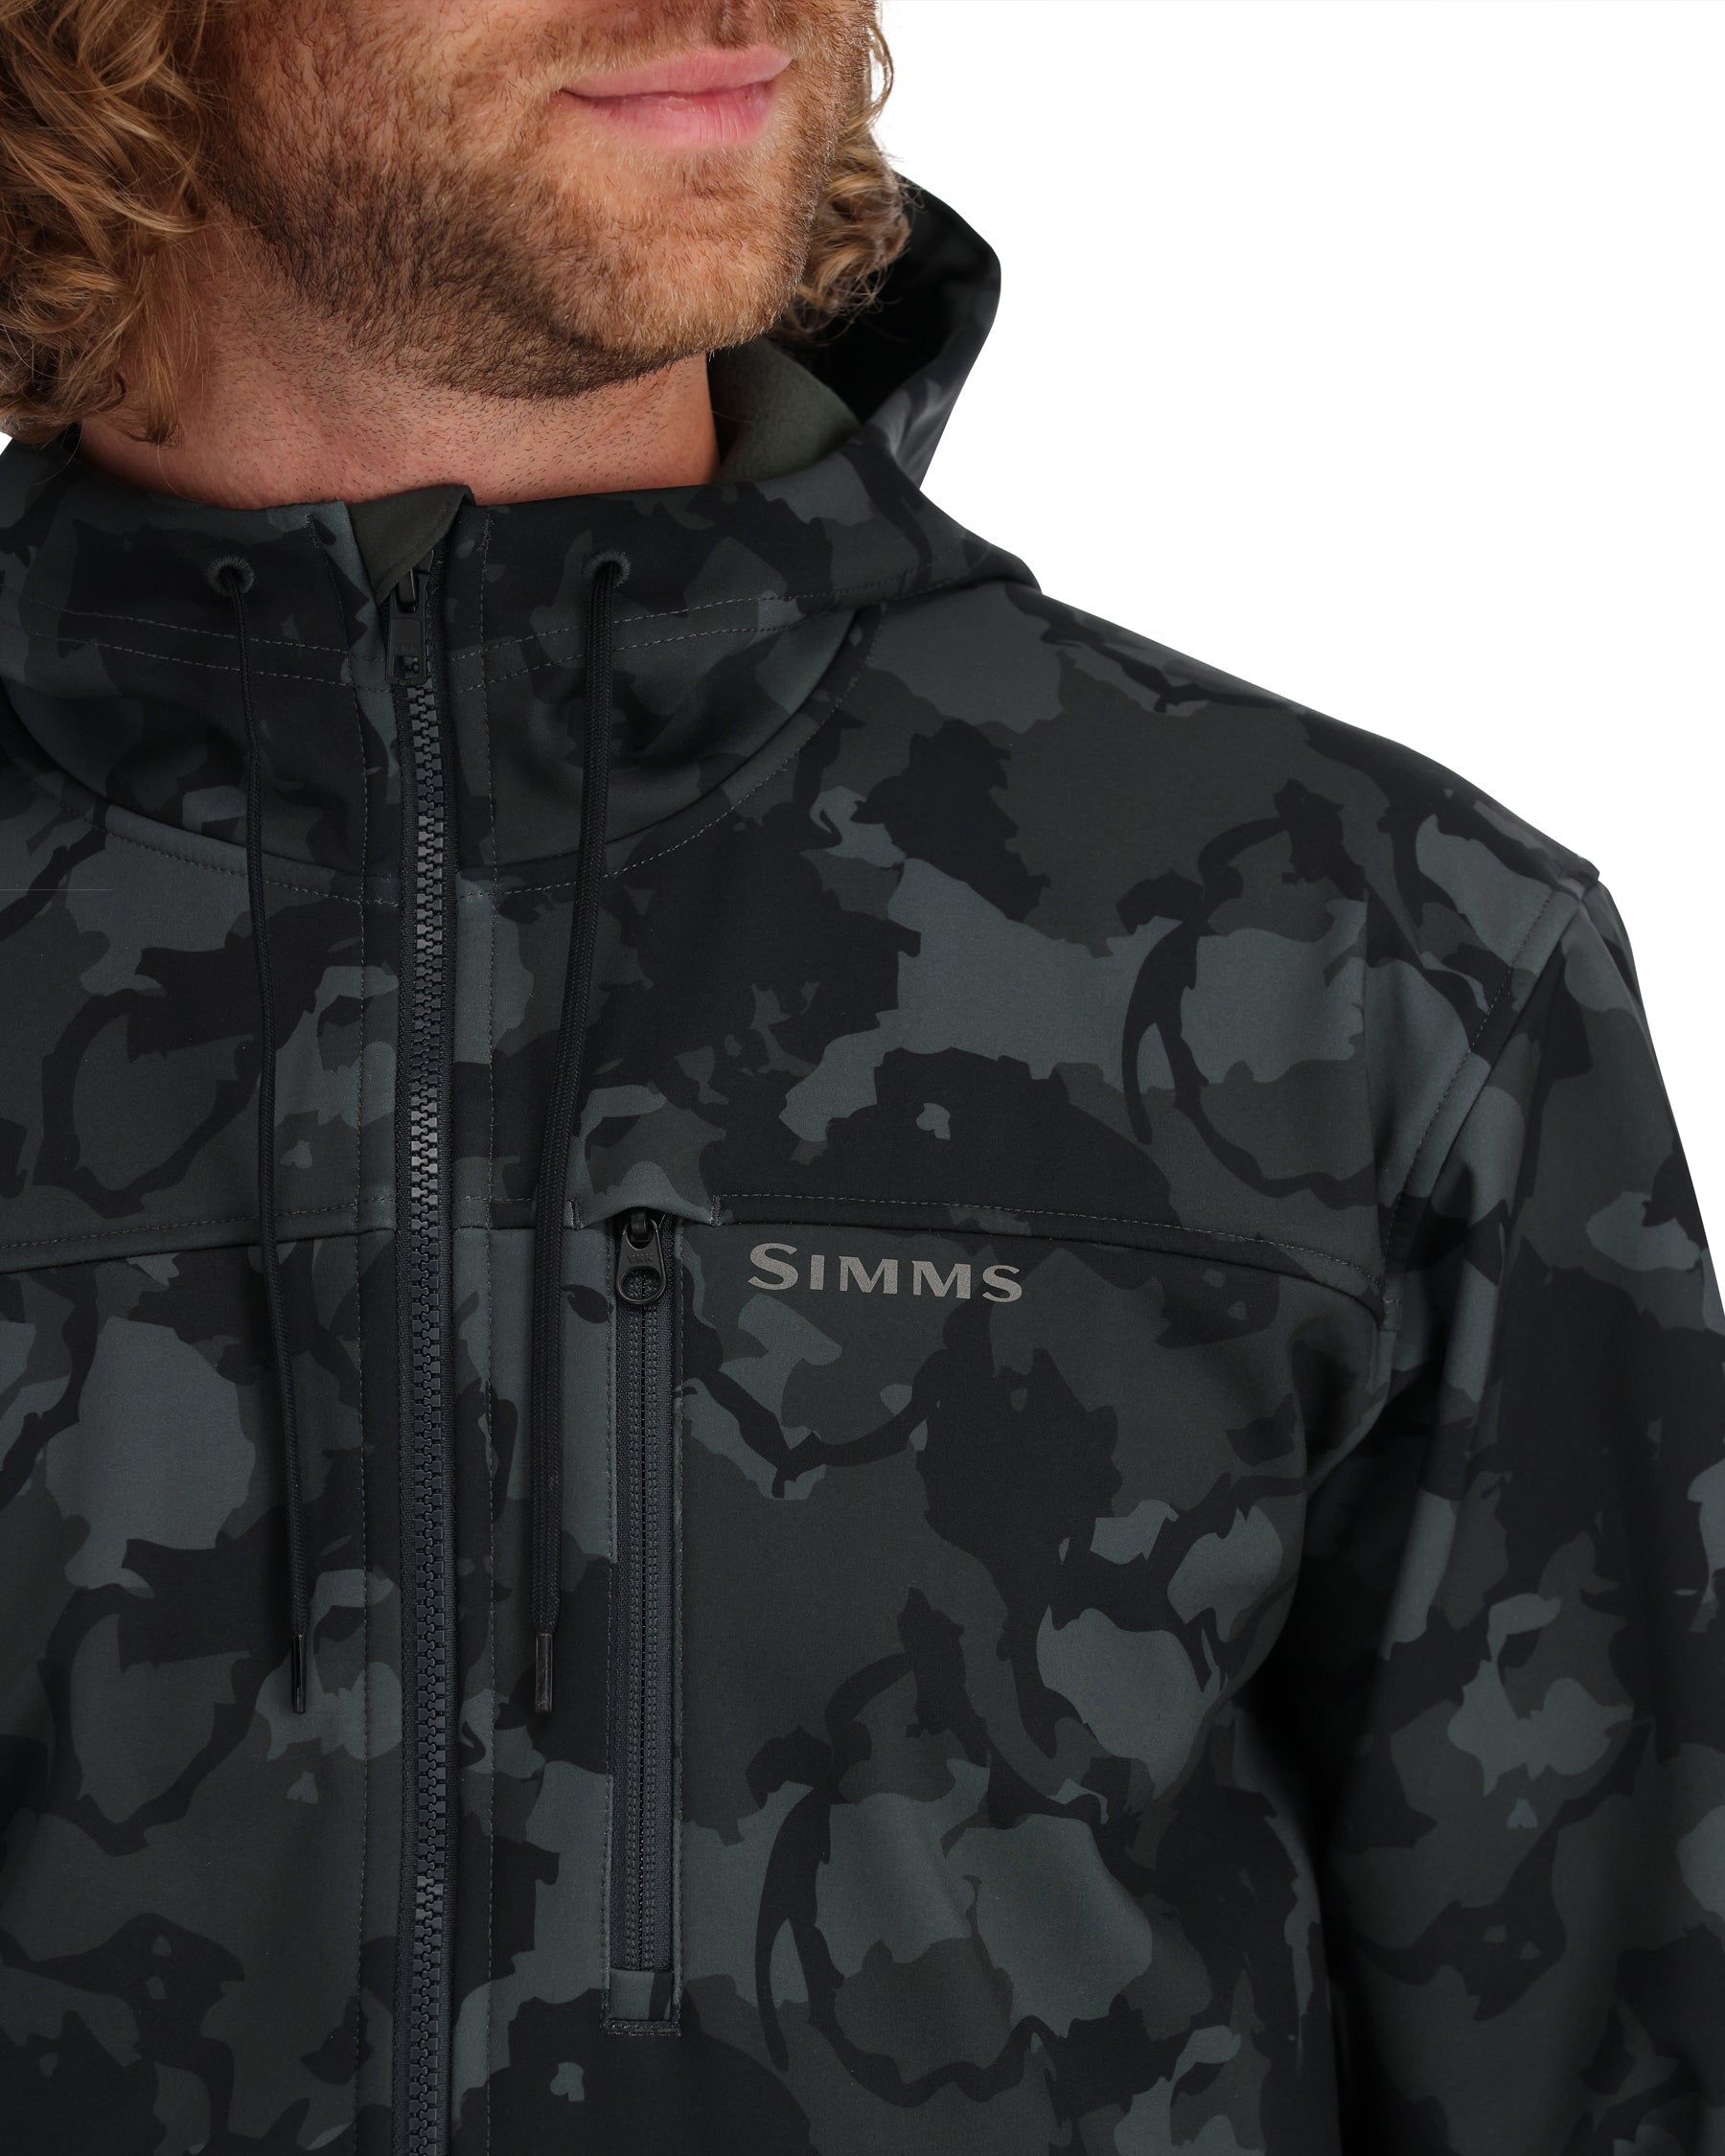 Simms Rogue Hoody - Clay - Size 3XL